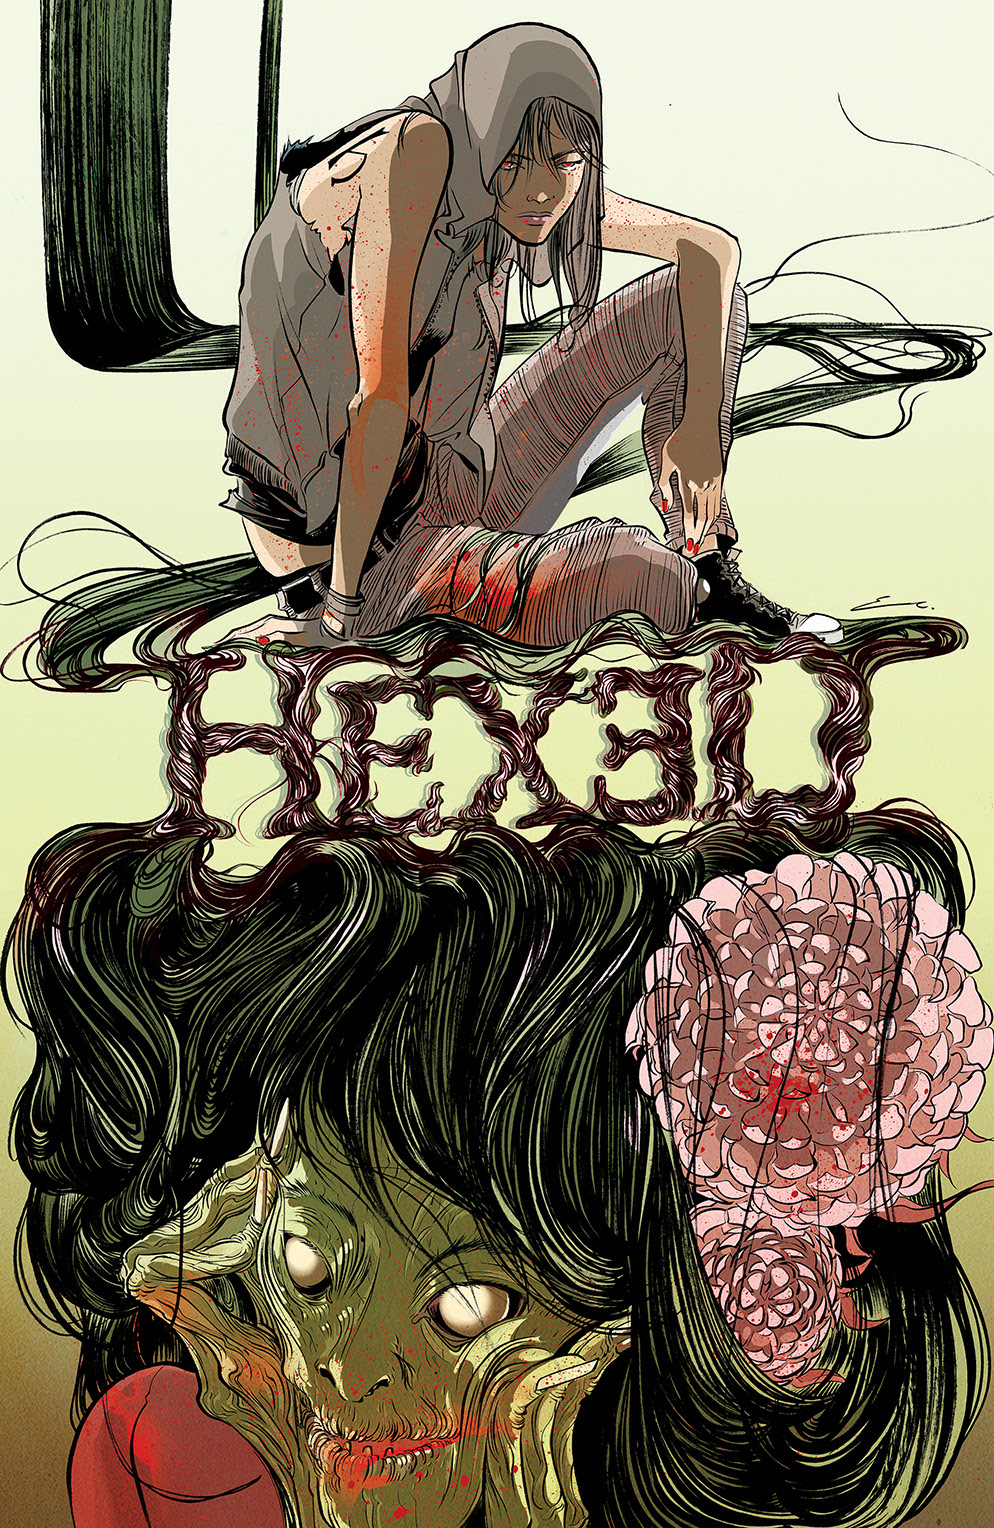 HEXED #1 Cover A by Emma Rios